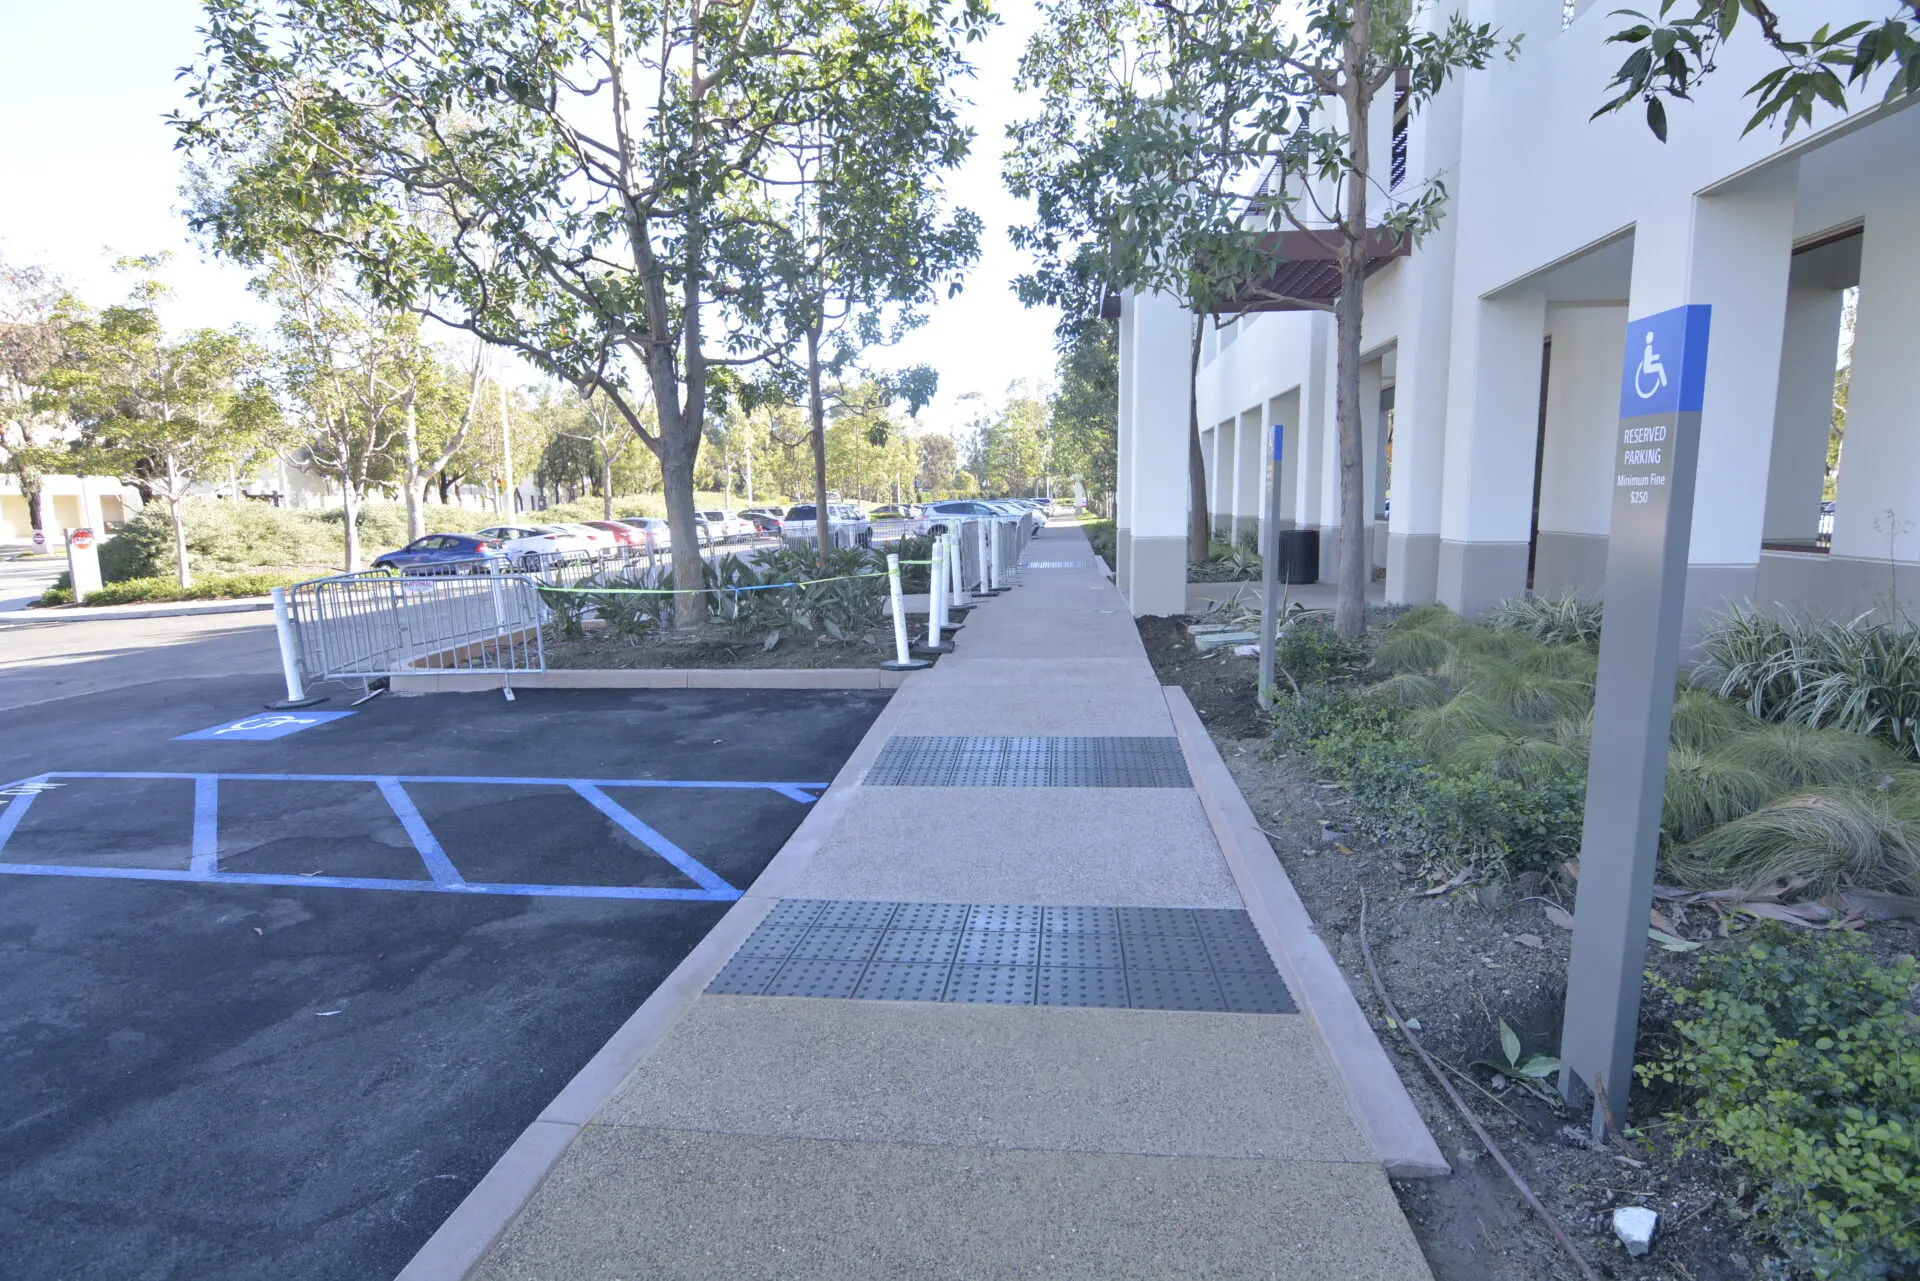 Parking spaces for people with disabilities